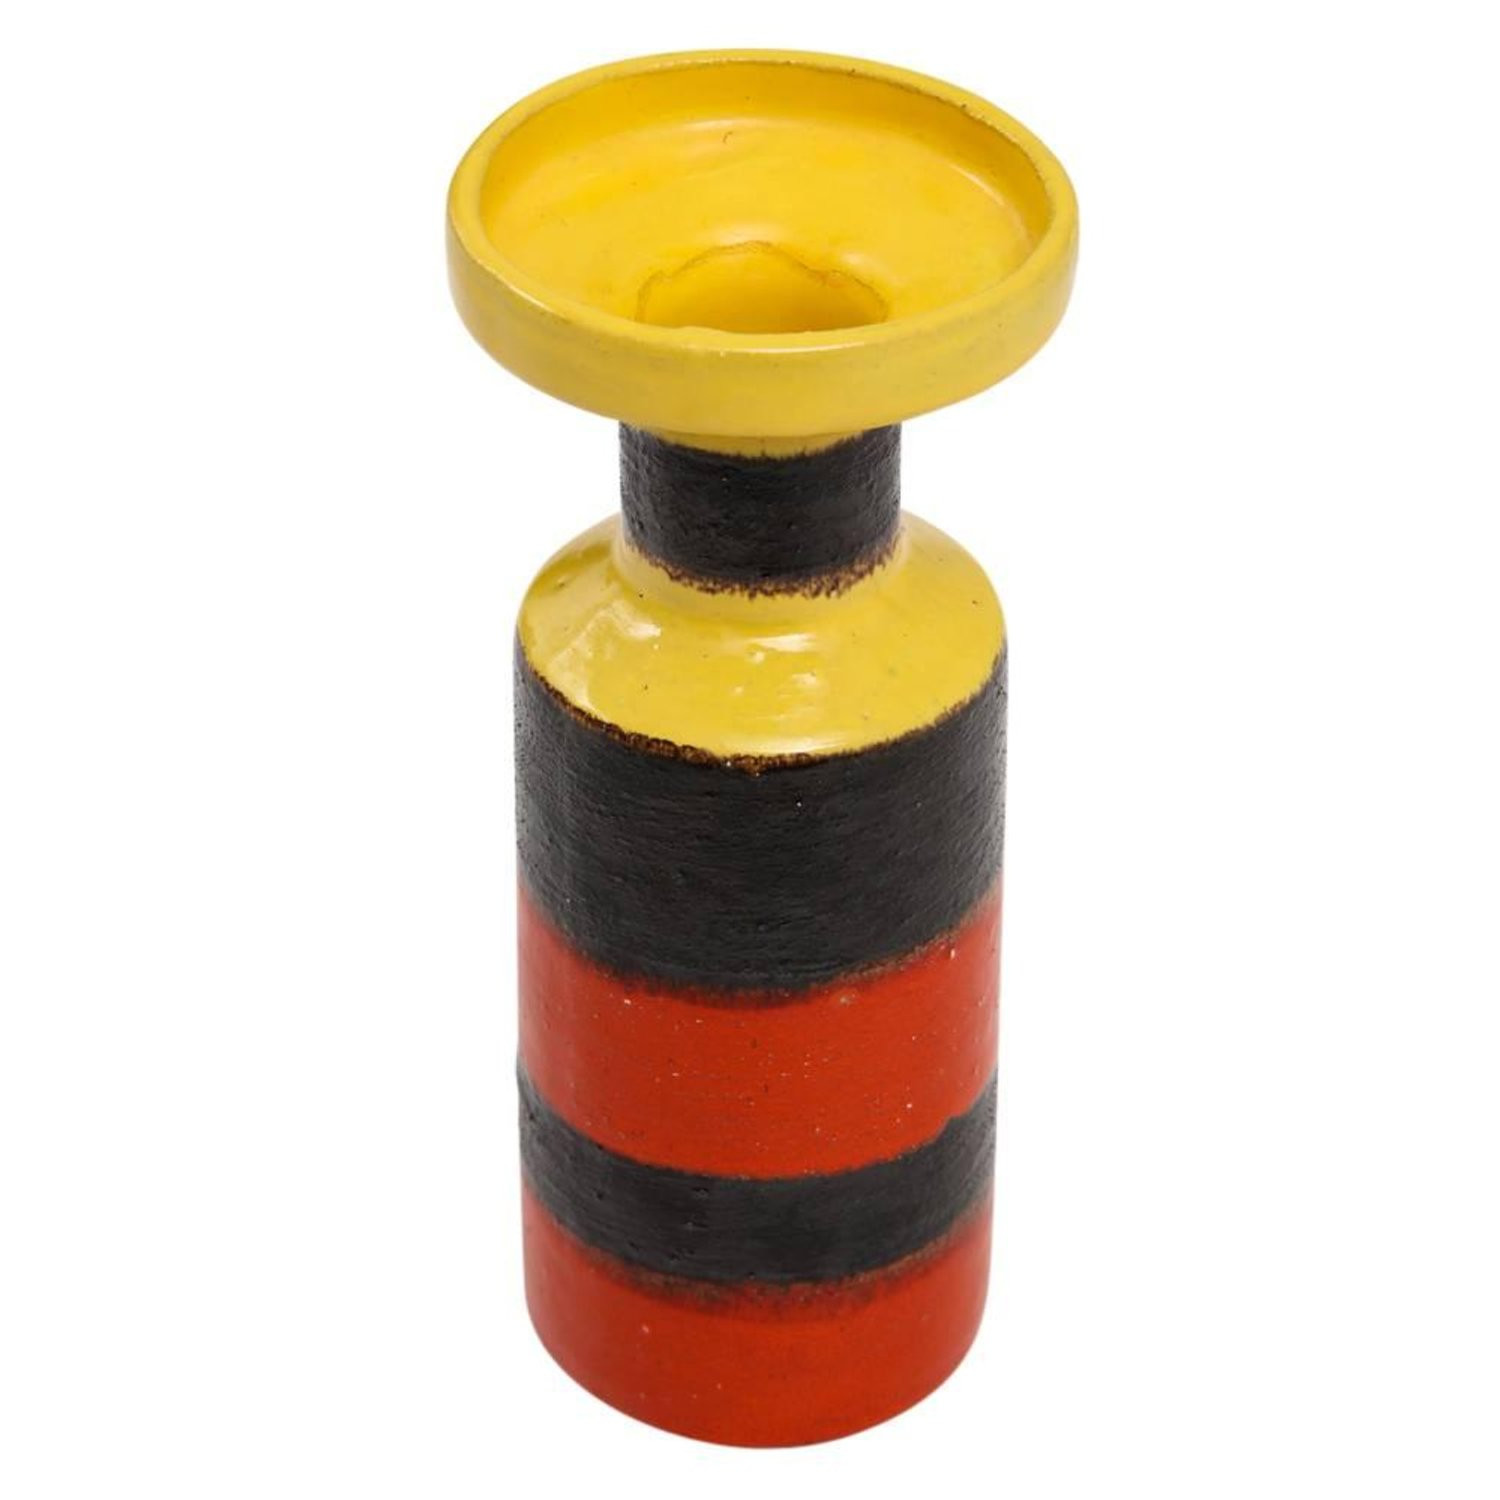 14 Ideal Ettore sottsass Vase 2023 free download ettore sottsass vase of bitossi ceramic vase pottery stripes yellow red black signed italy for bitossi ceramic vase pottery stripes yellow red black signed italy 1960s for sale at 1stdibs